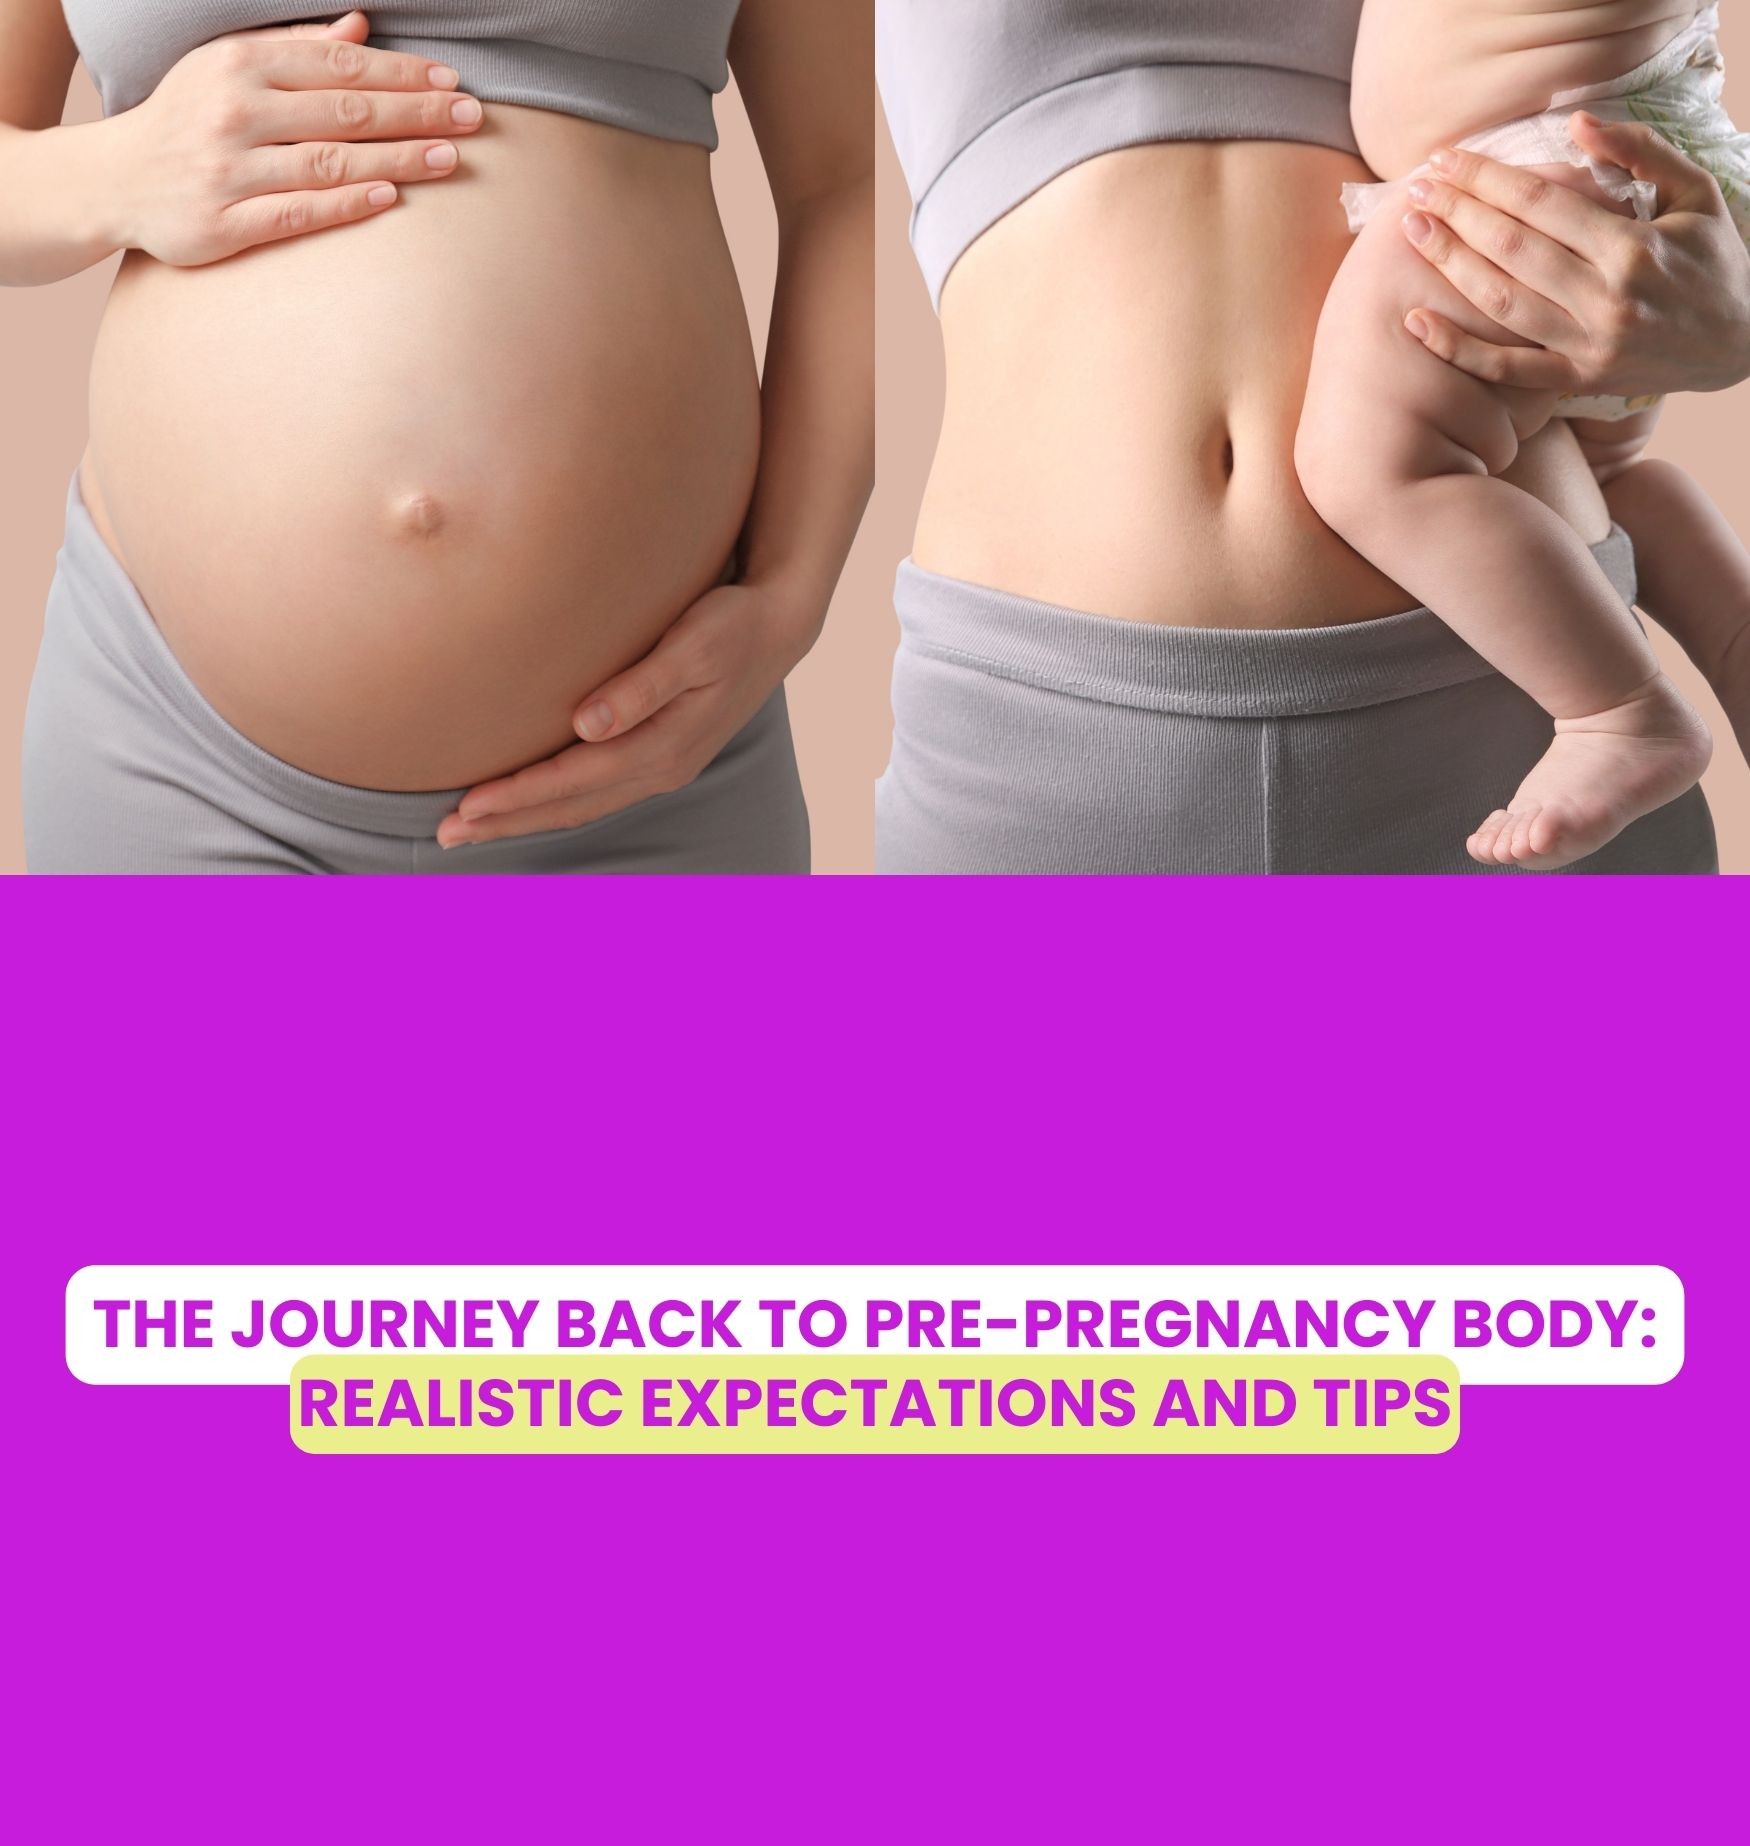 The Journey Back to Pre-Pregnancy Body: Realistic Expectations and Tips